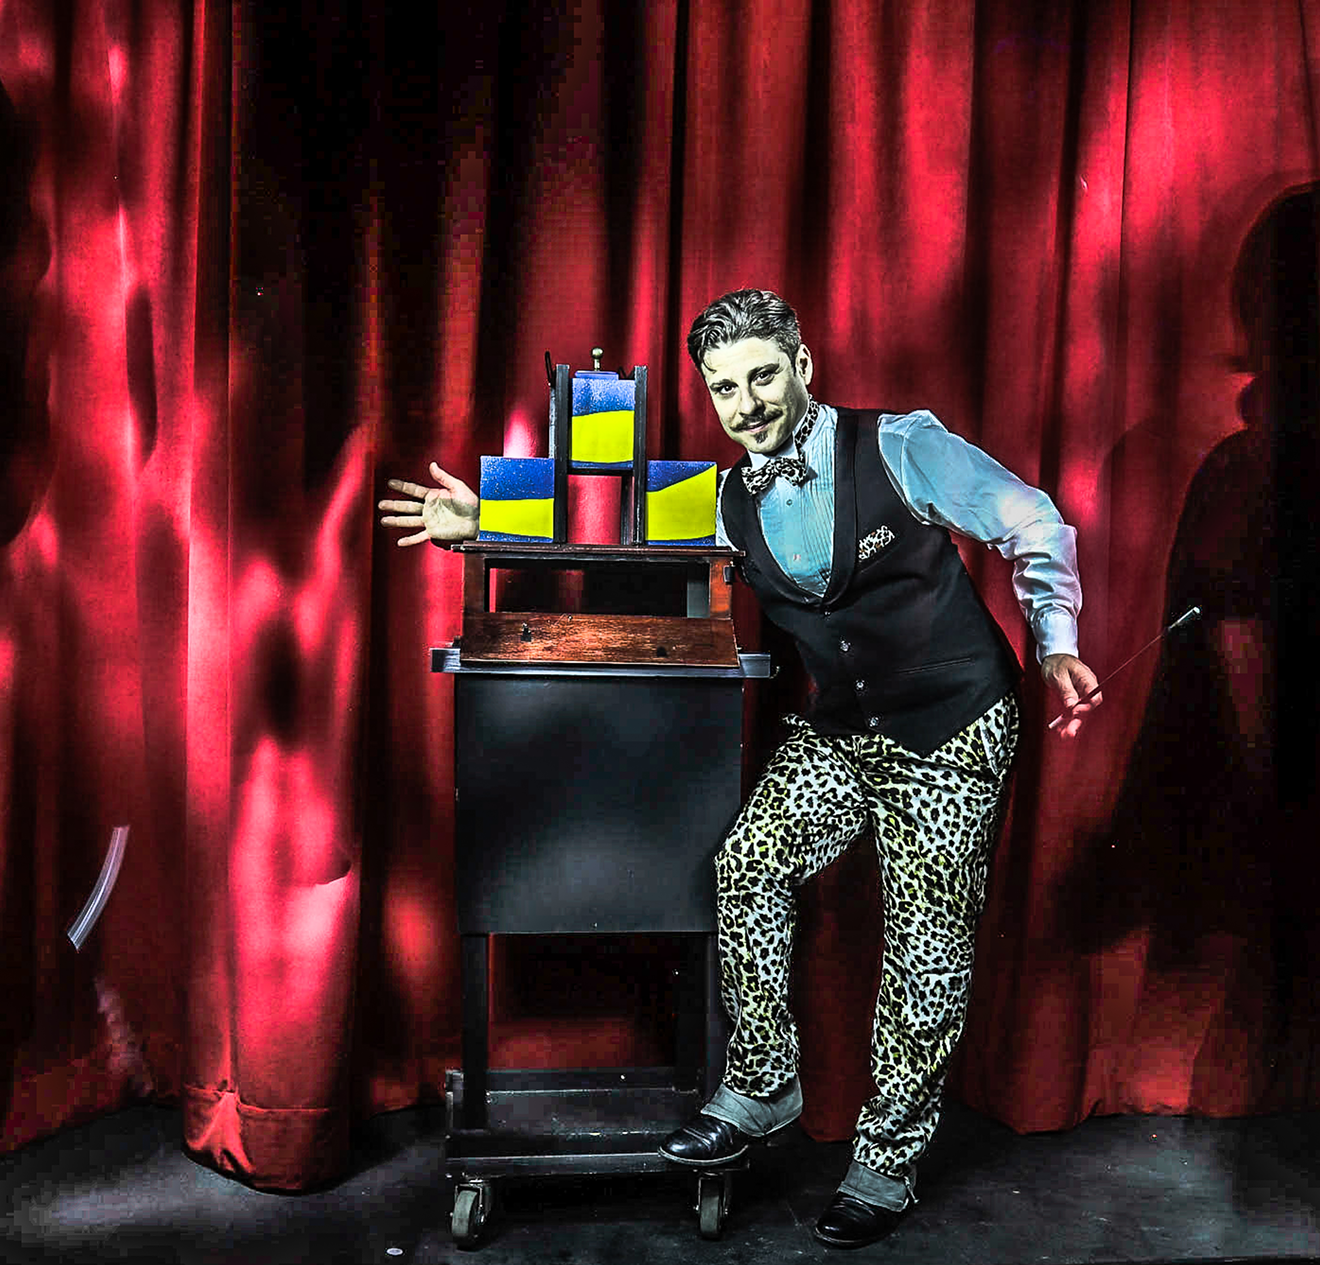 Edward Ruiz, also known as Deep Ellum's most famous magician Confetti Eddie, performing an illusion at his magic parlor on Exposition Avenue.